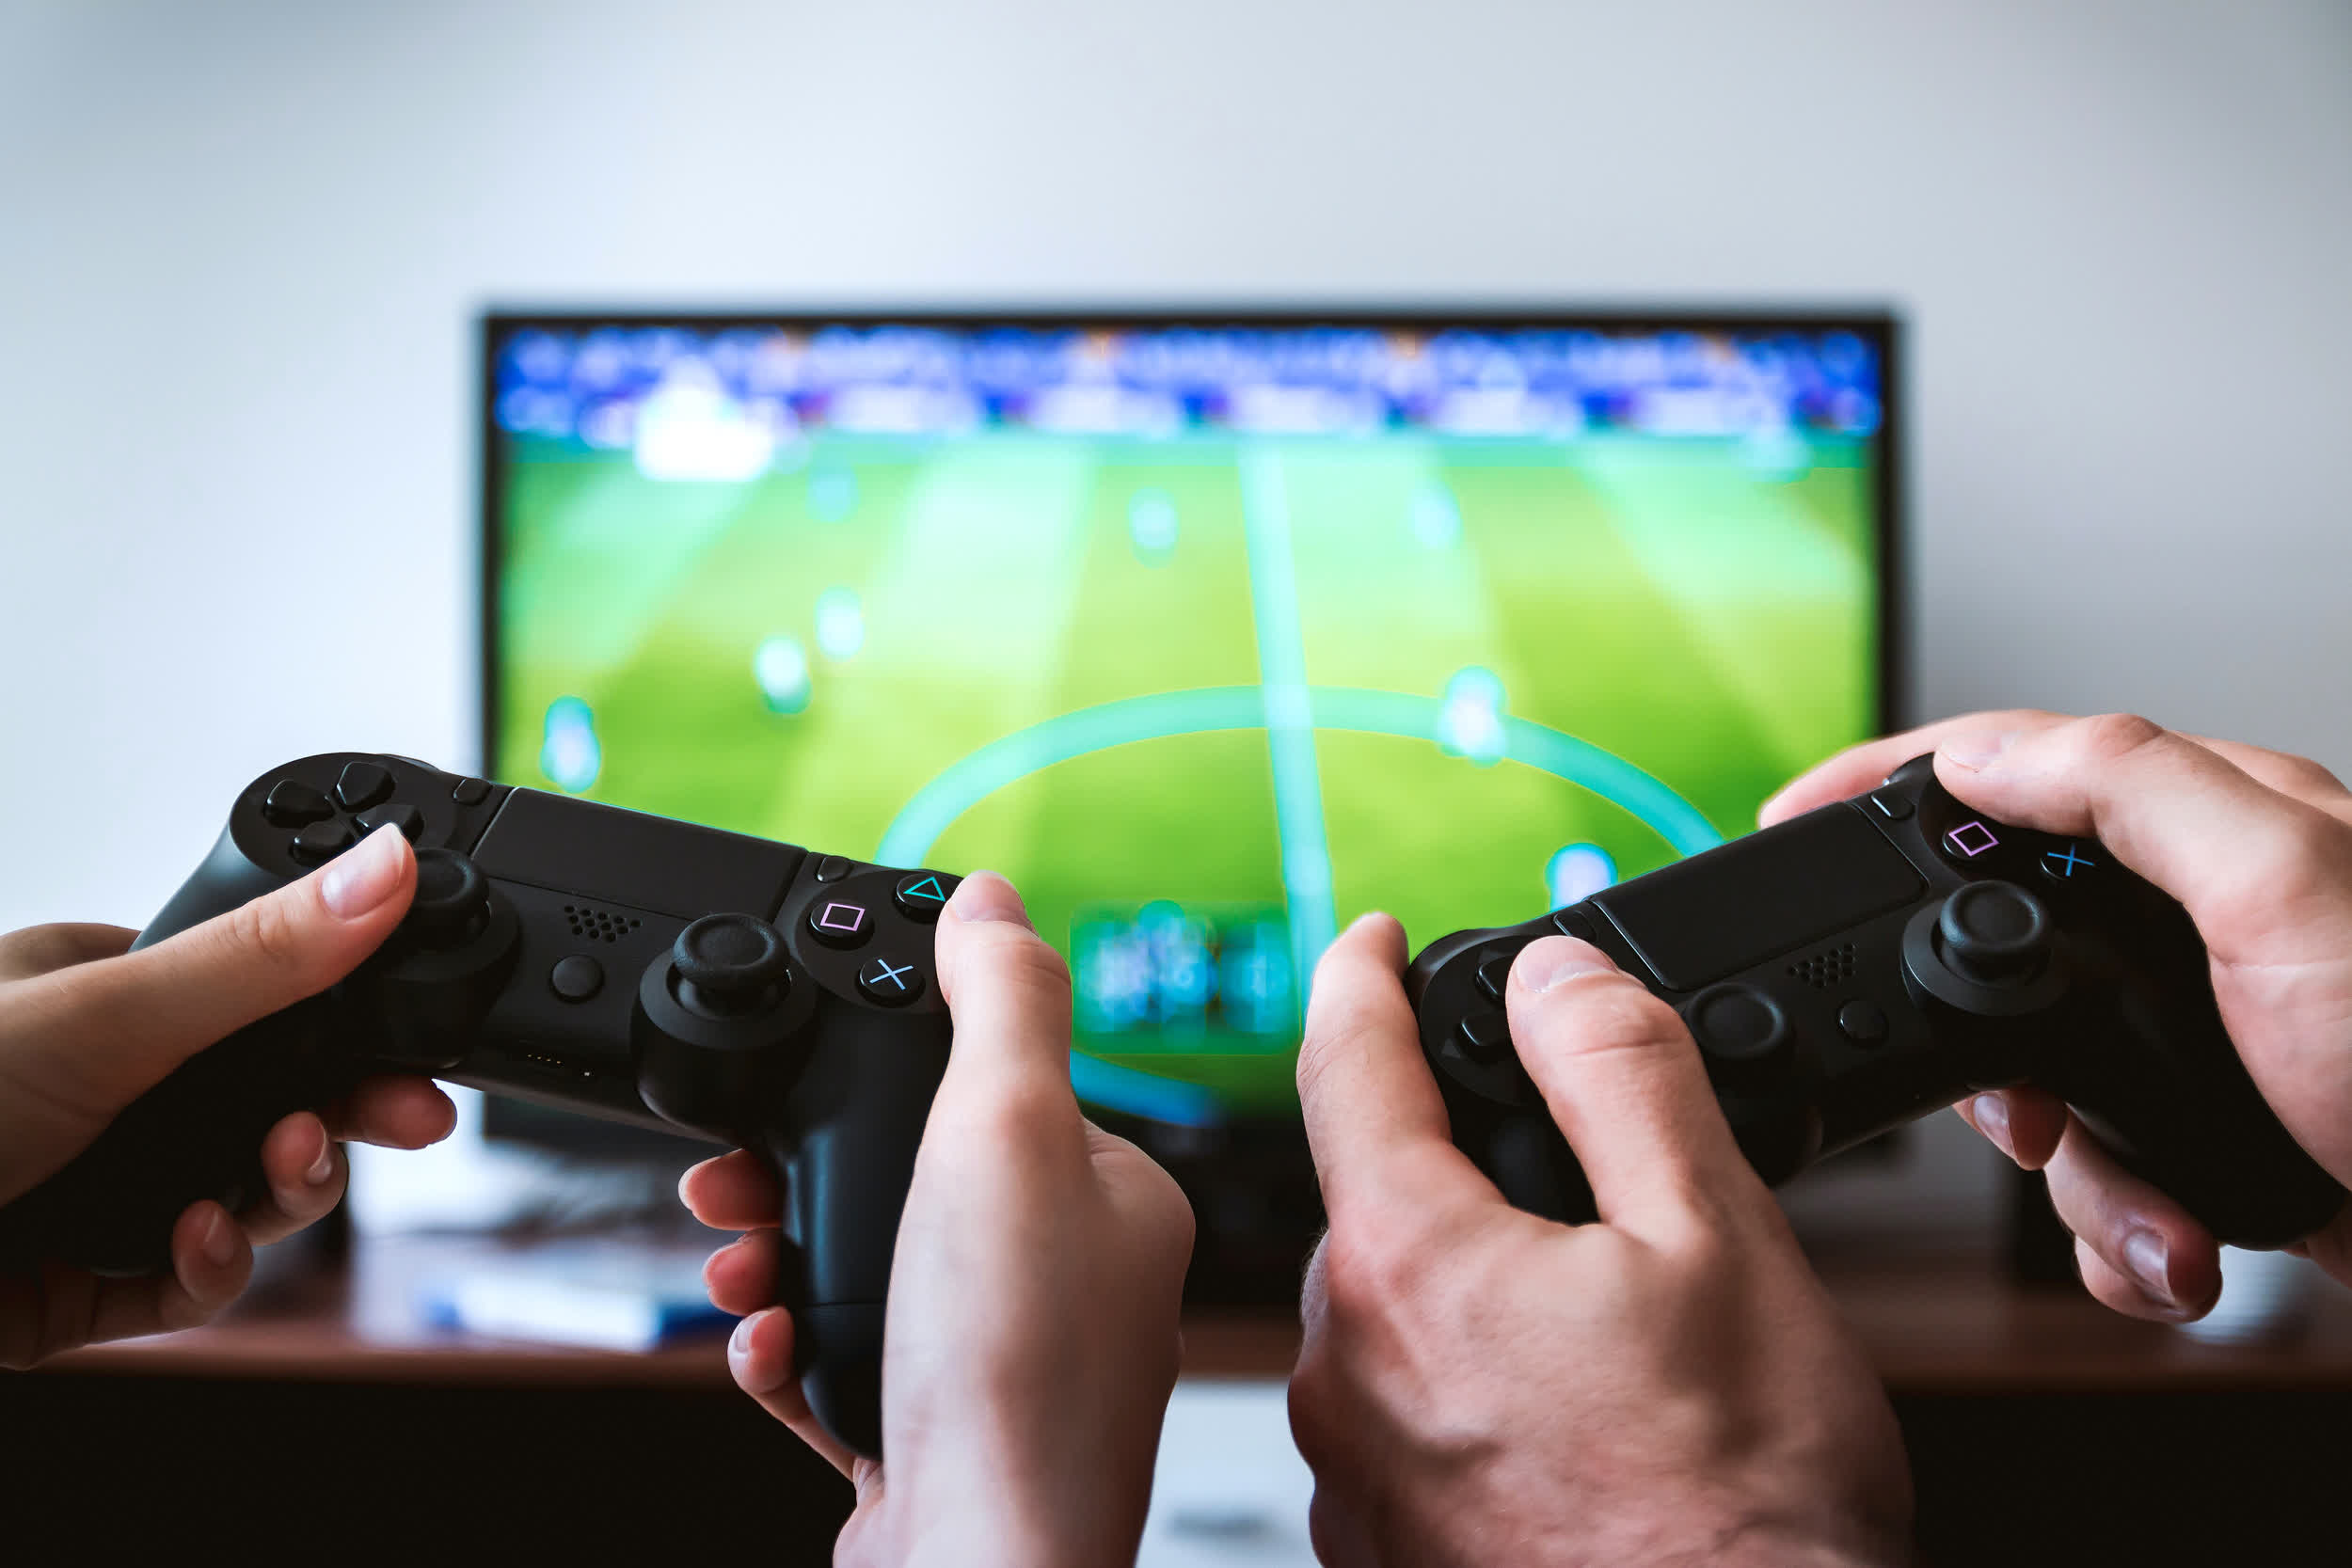 Millennials spend more time gaming than any other age group